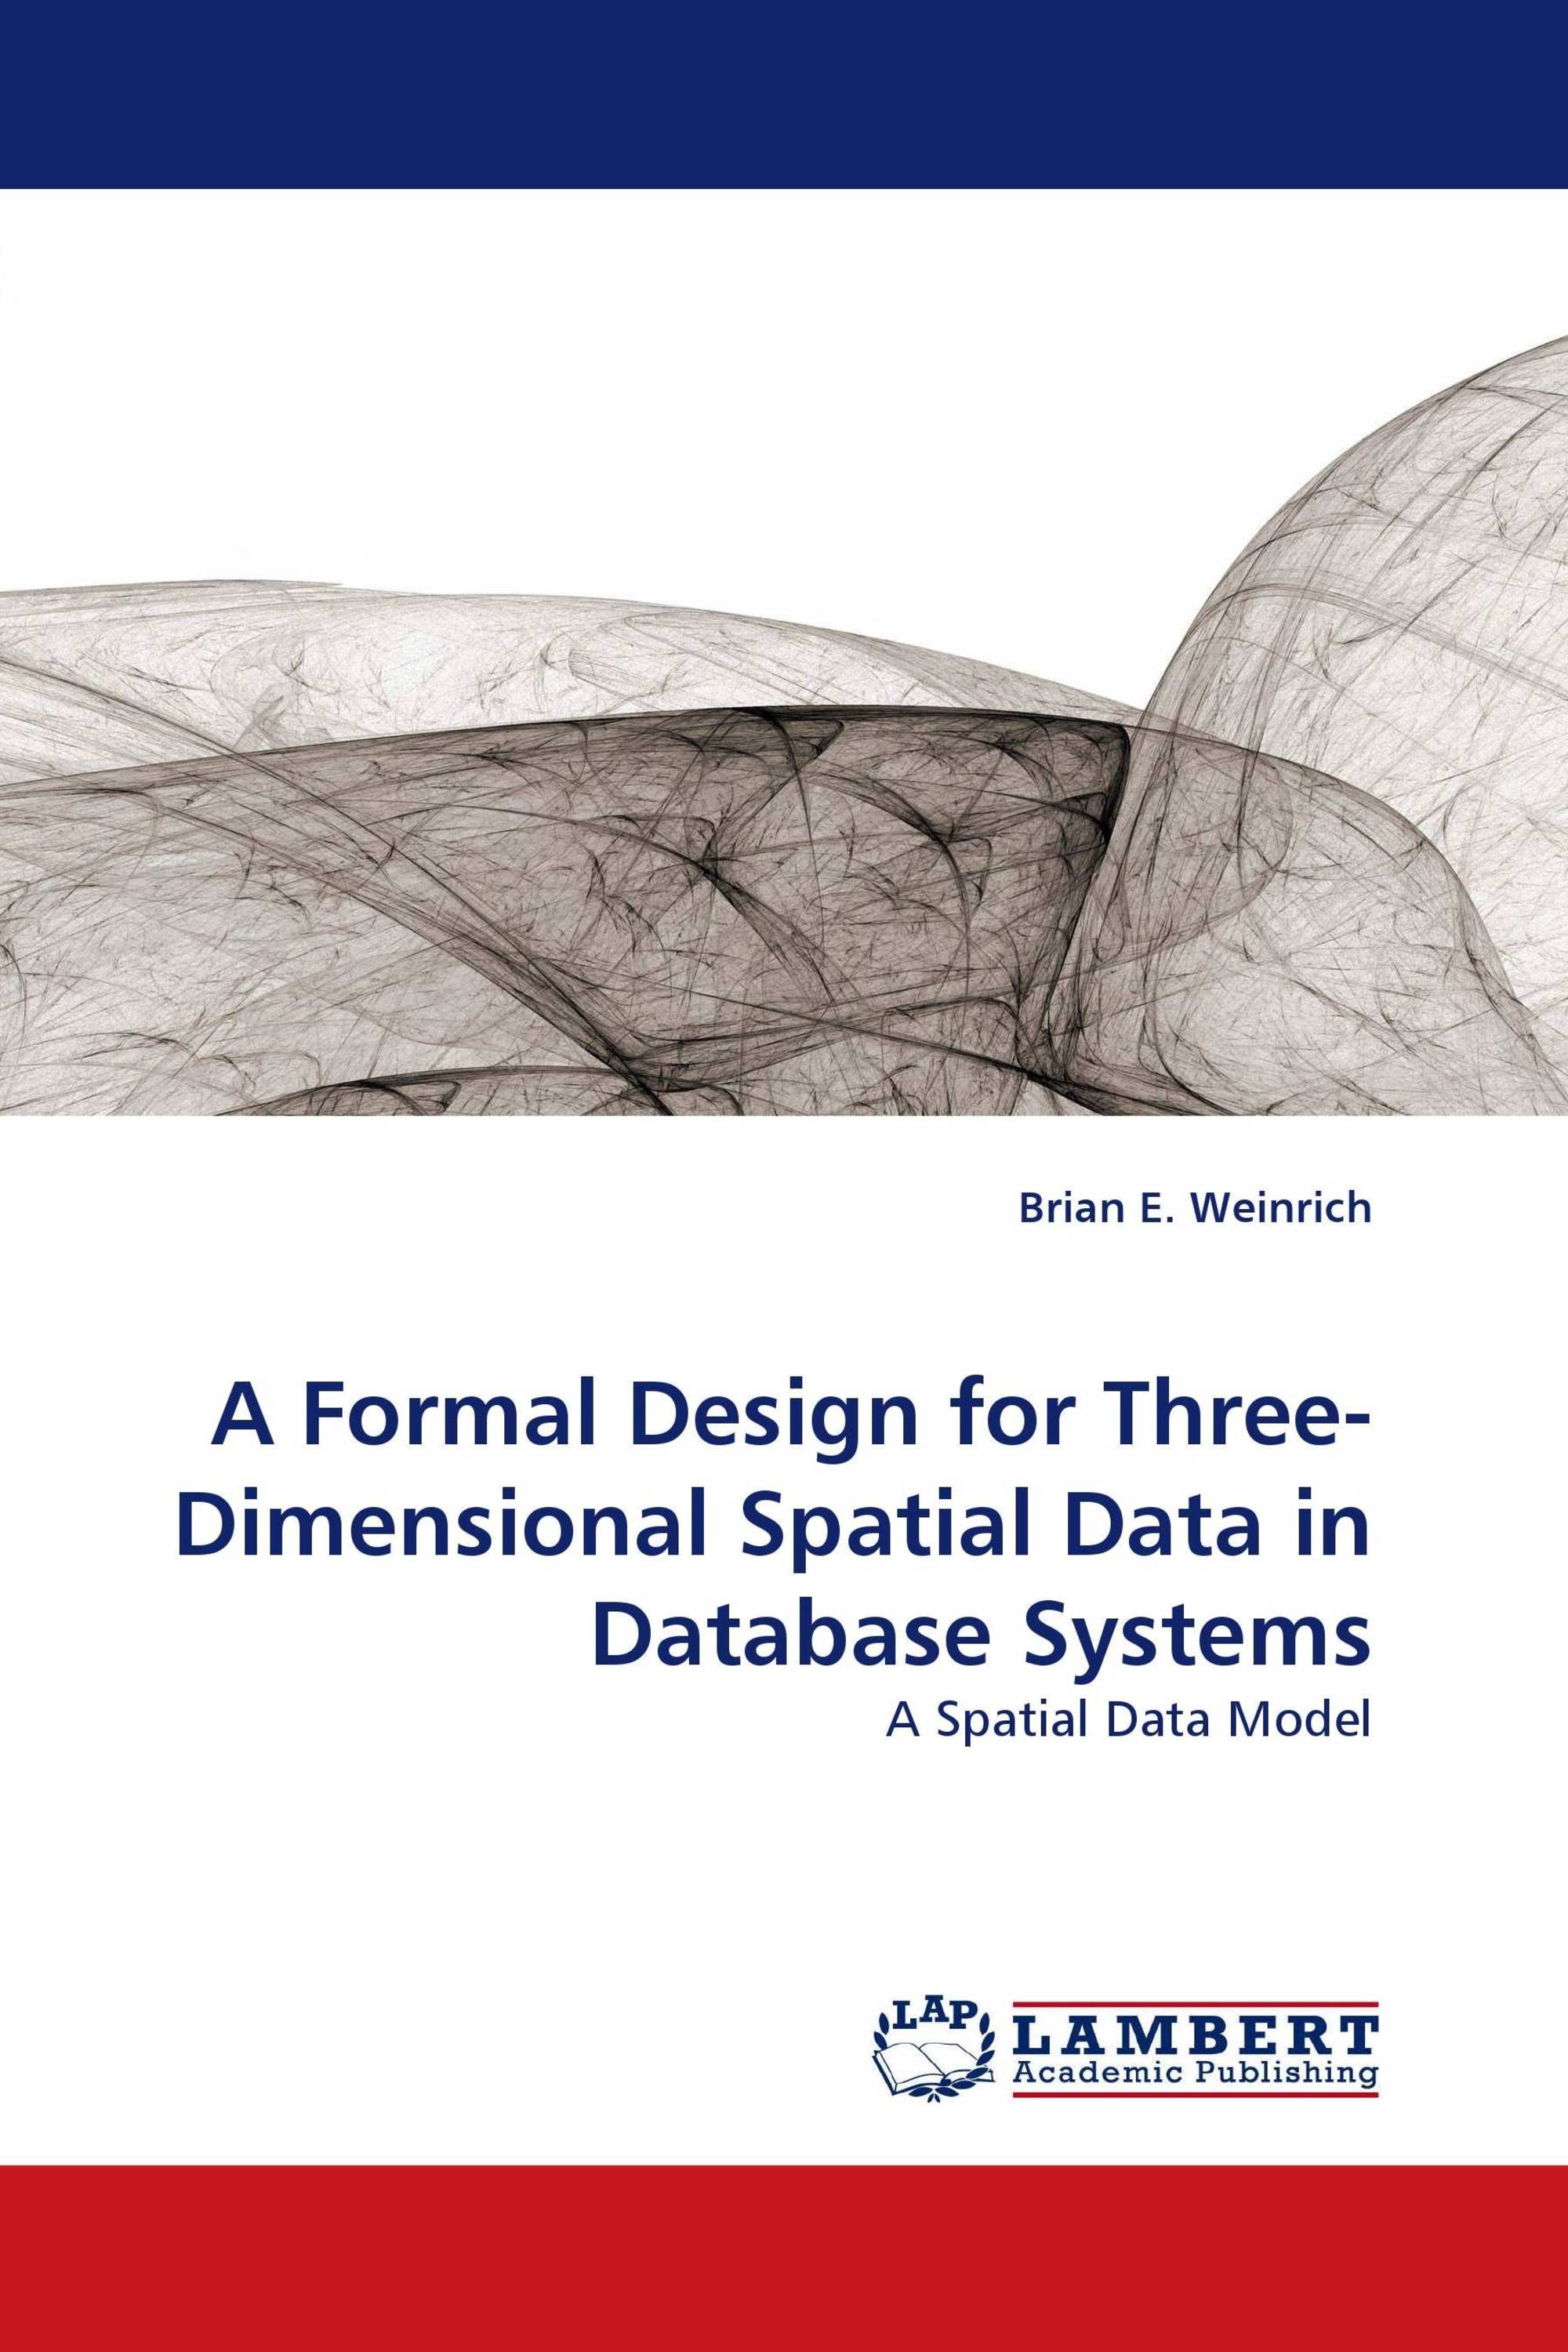 A Formal Design for Three-Dimensional Spatial Data in Database Systems